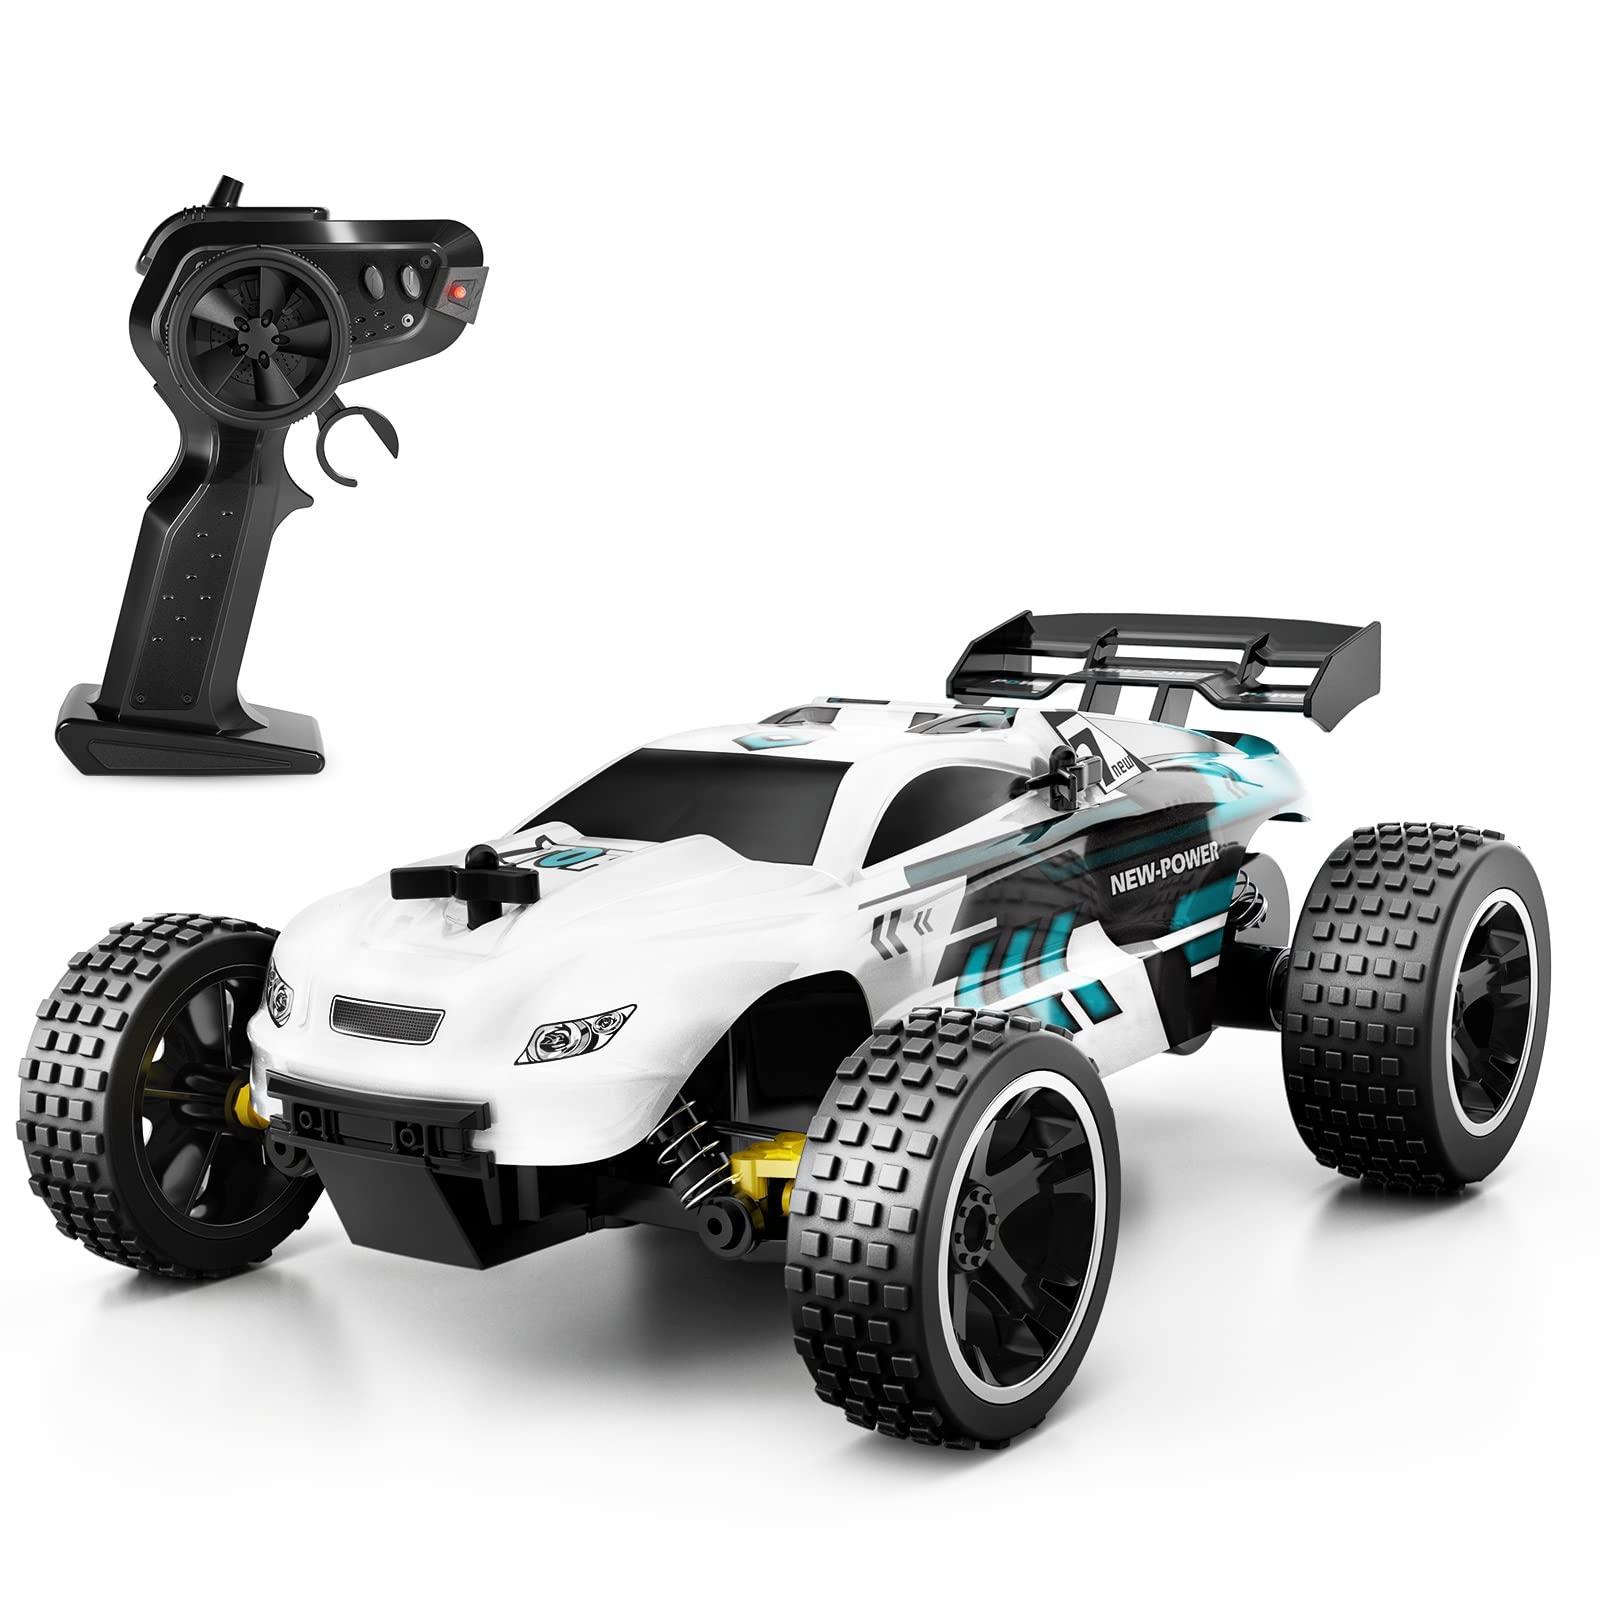 Tecnock Rc Car: High Performance RC Car for Beginners and Enthusiasts Alike!